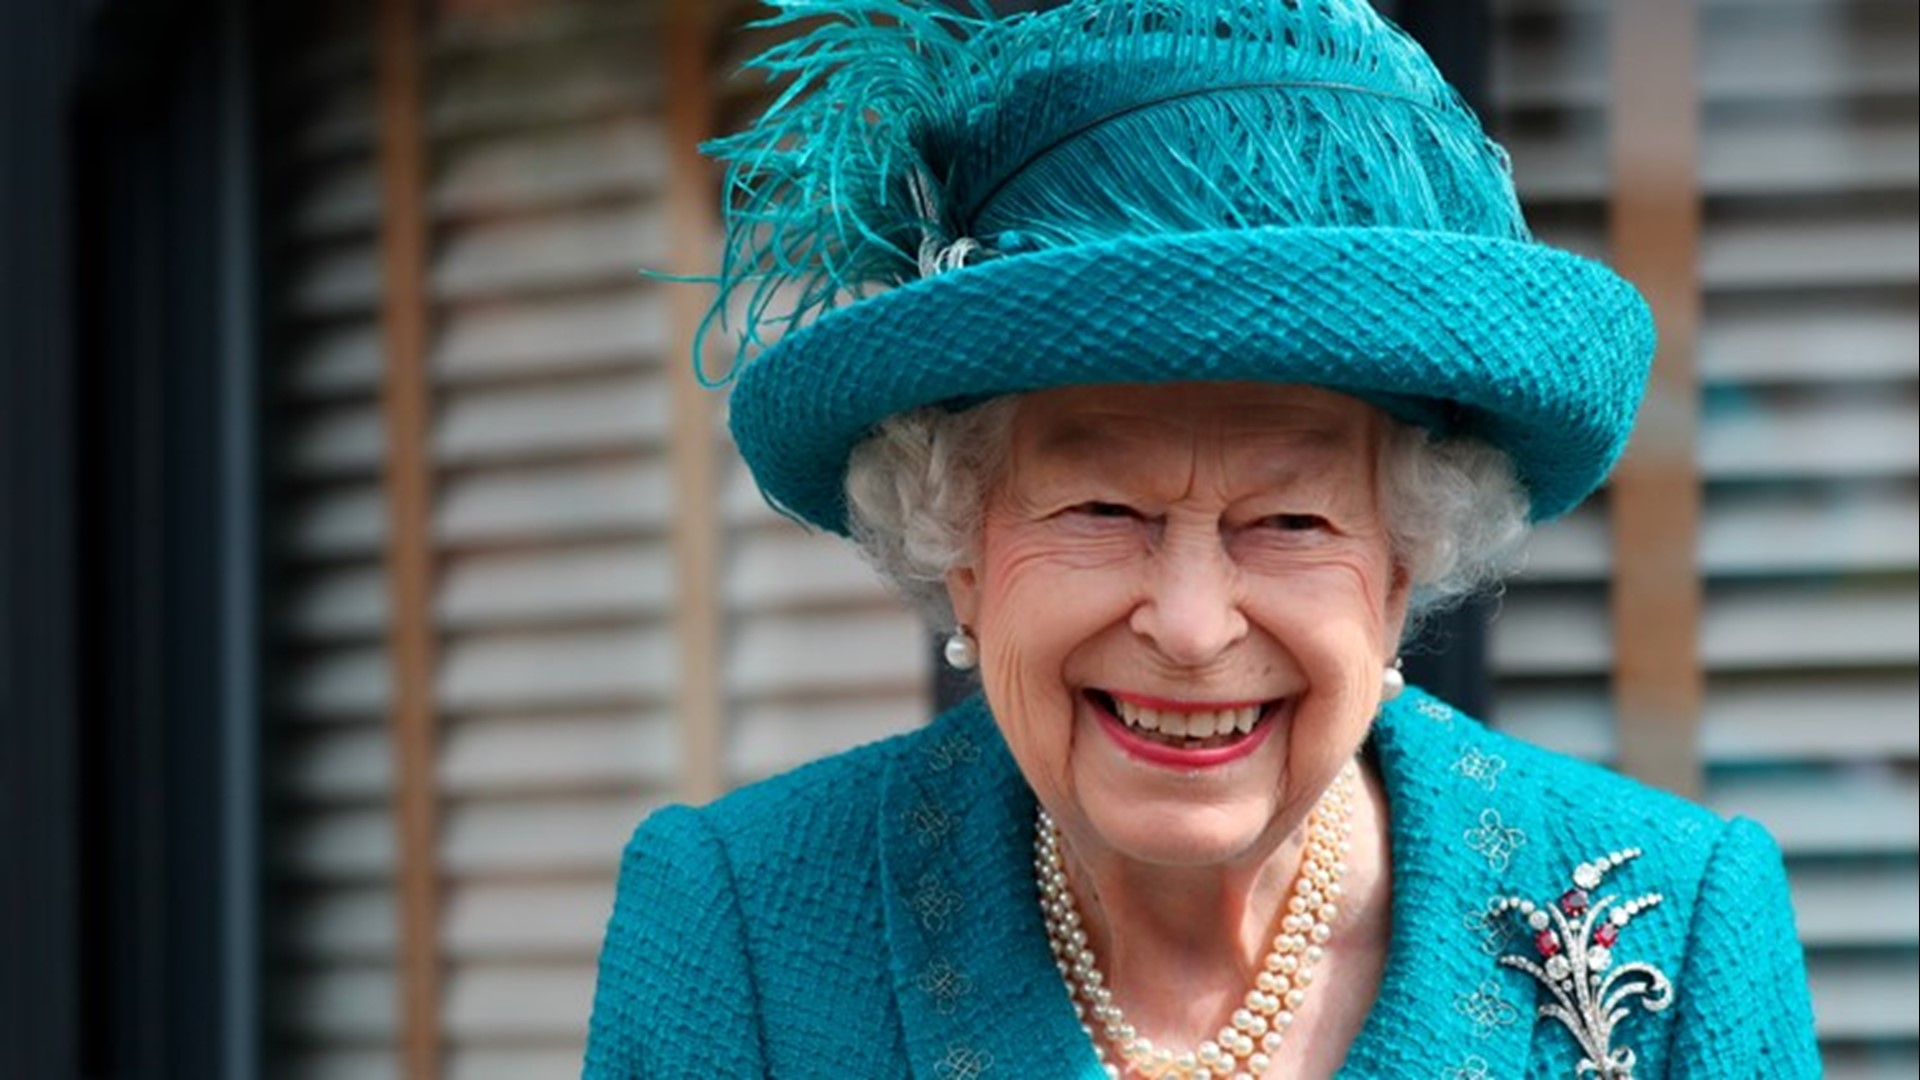 Elizabeth, who marked 70 years on the throne this year, was the oldest and longest-reigning monarch in British history.